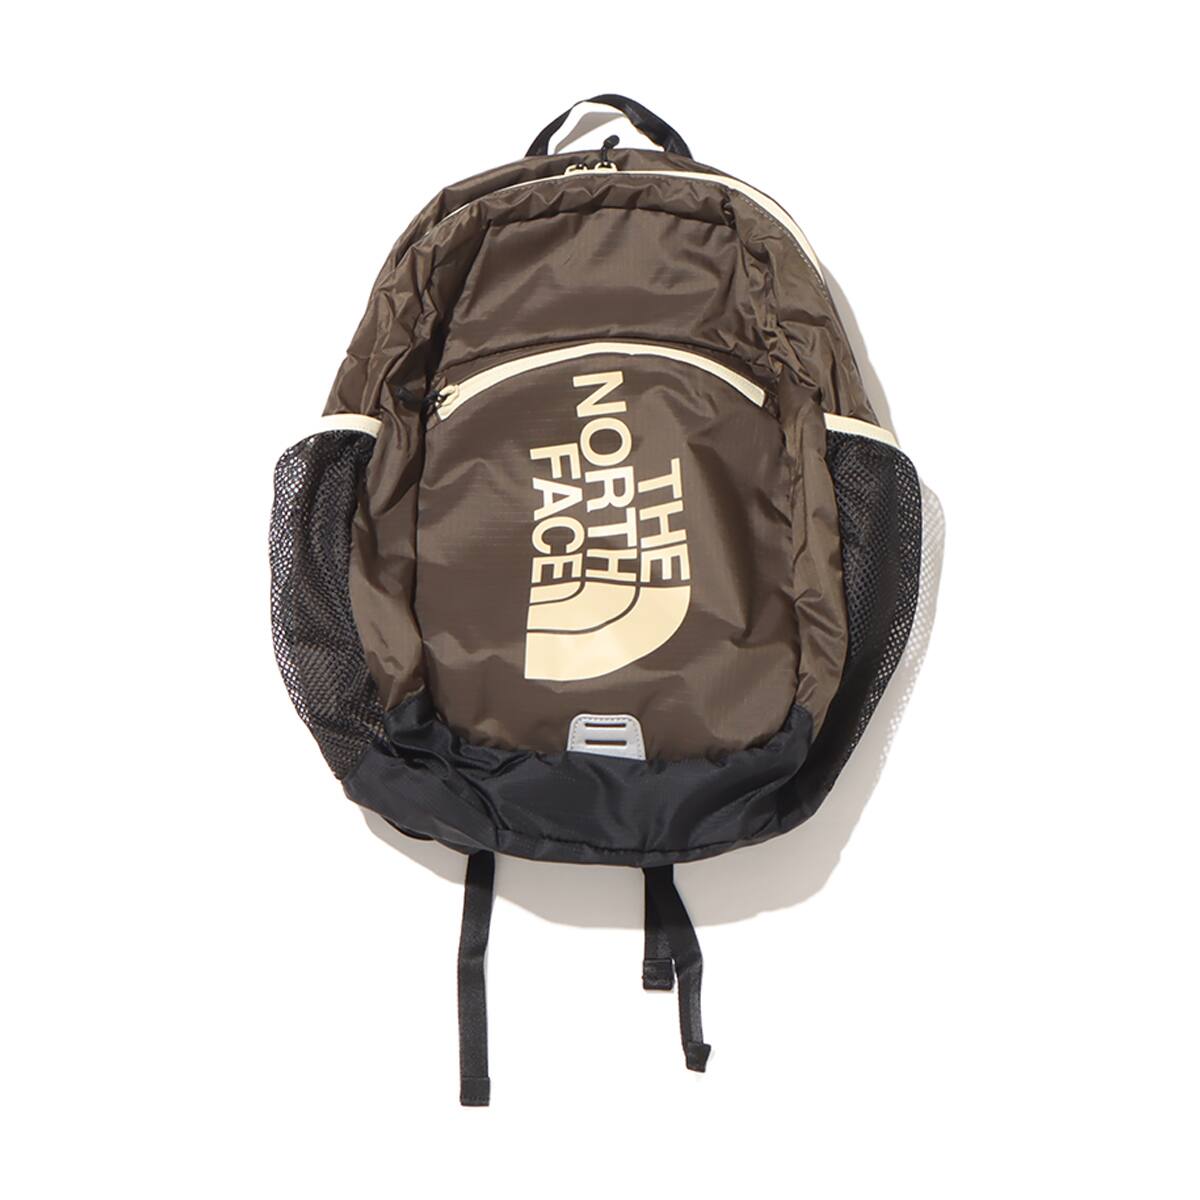 THE NORTH FACE バッグ